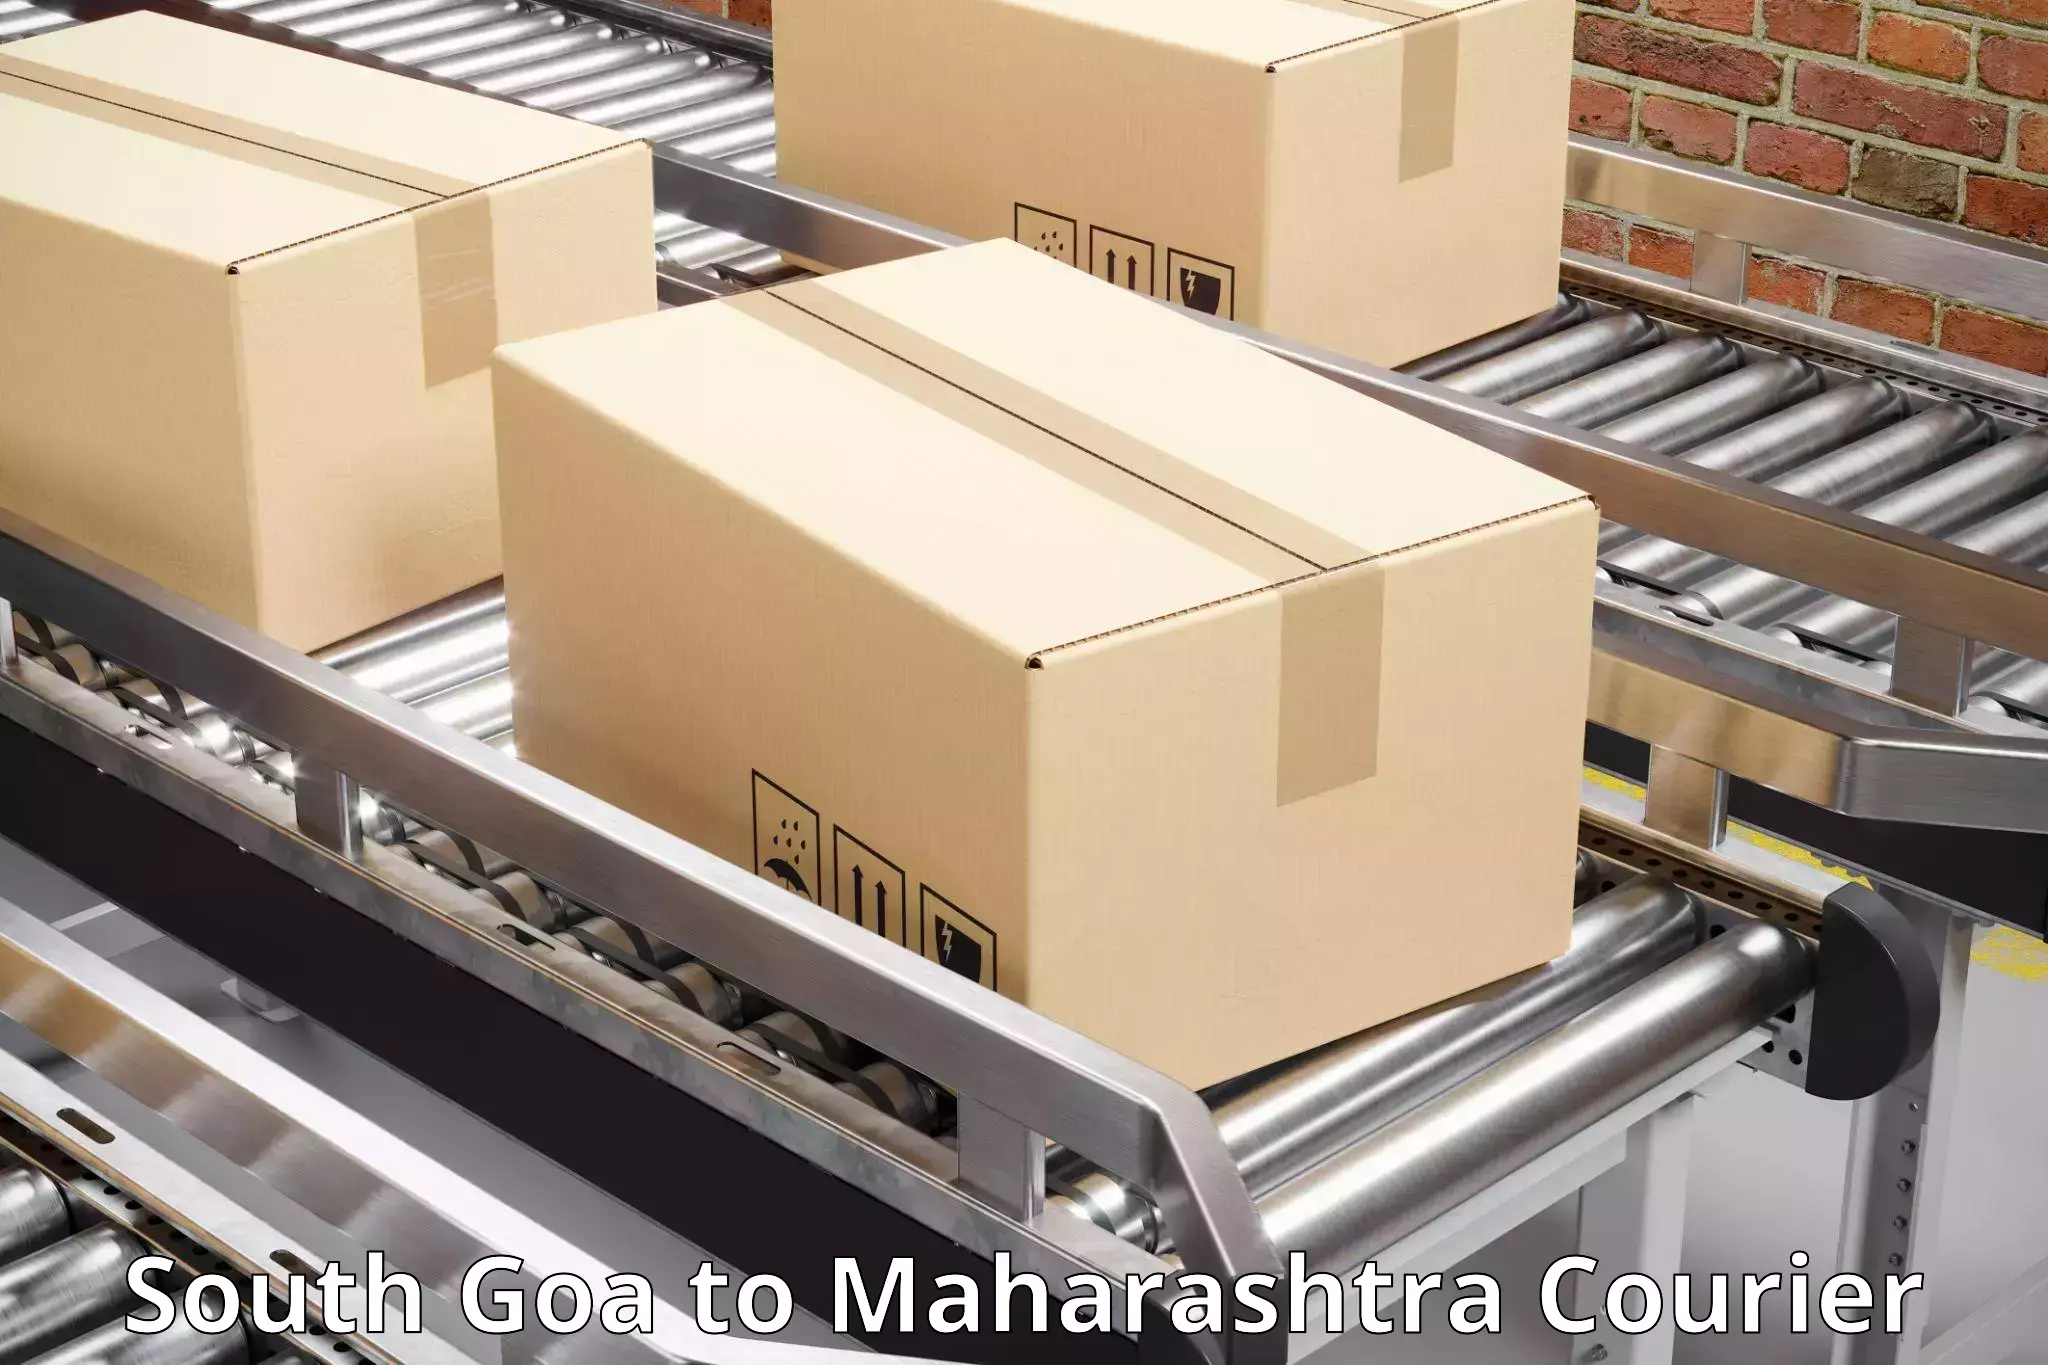 High-quality delivery services in South Goa to Koregaon